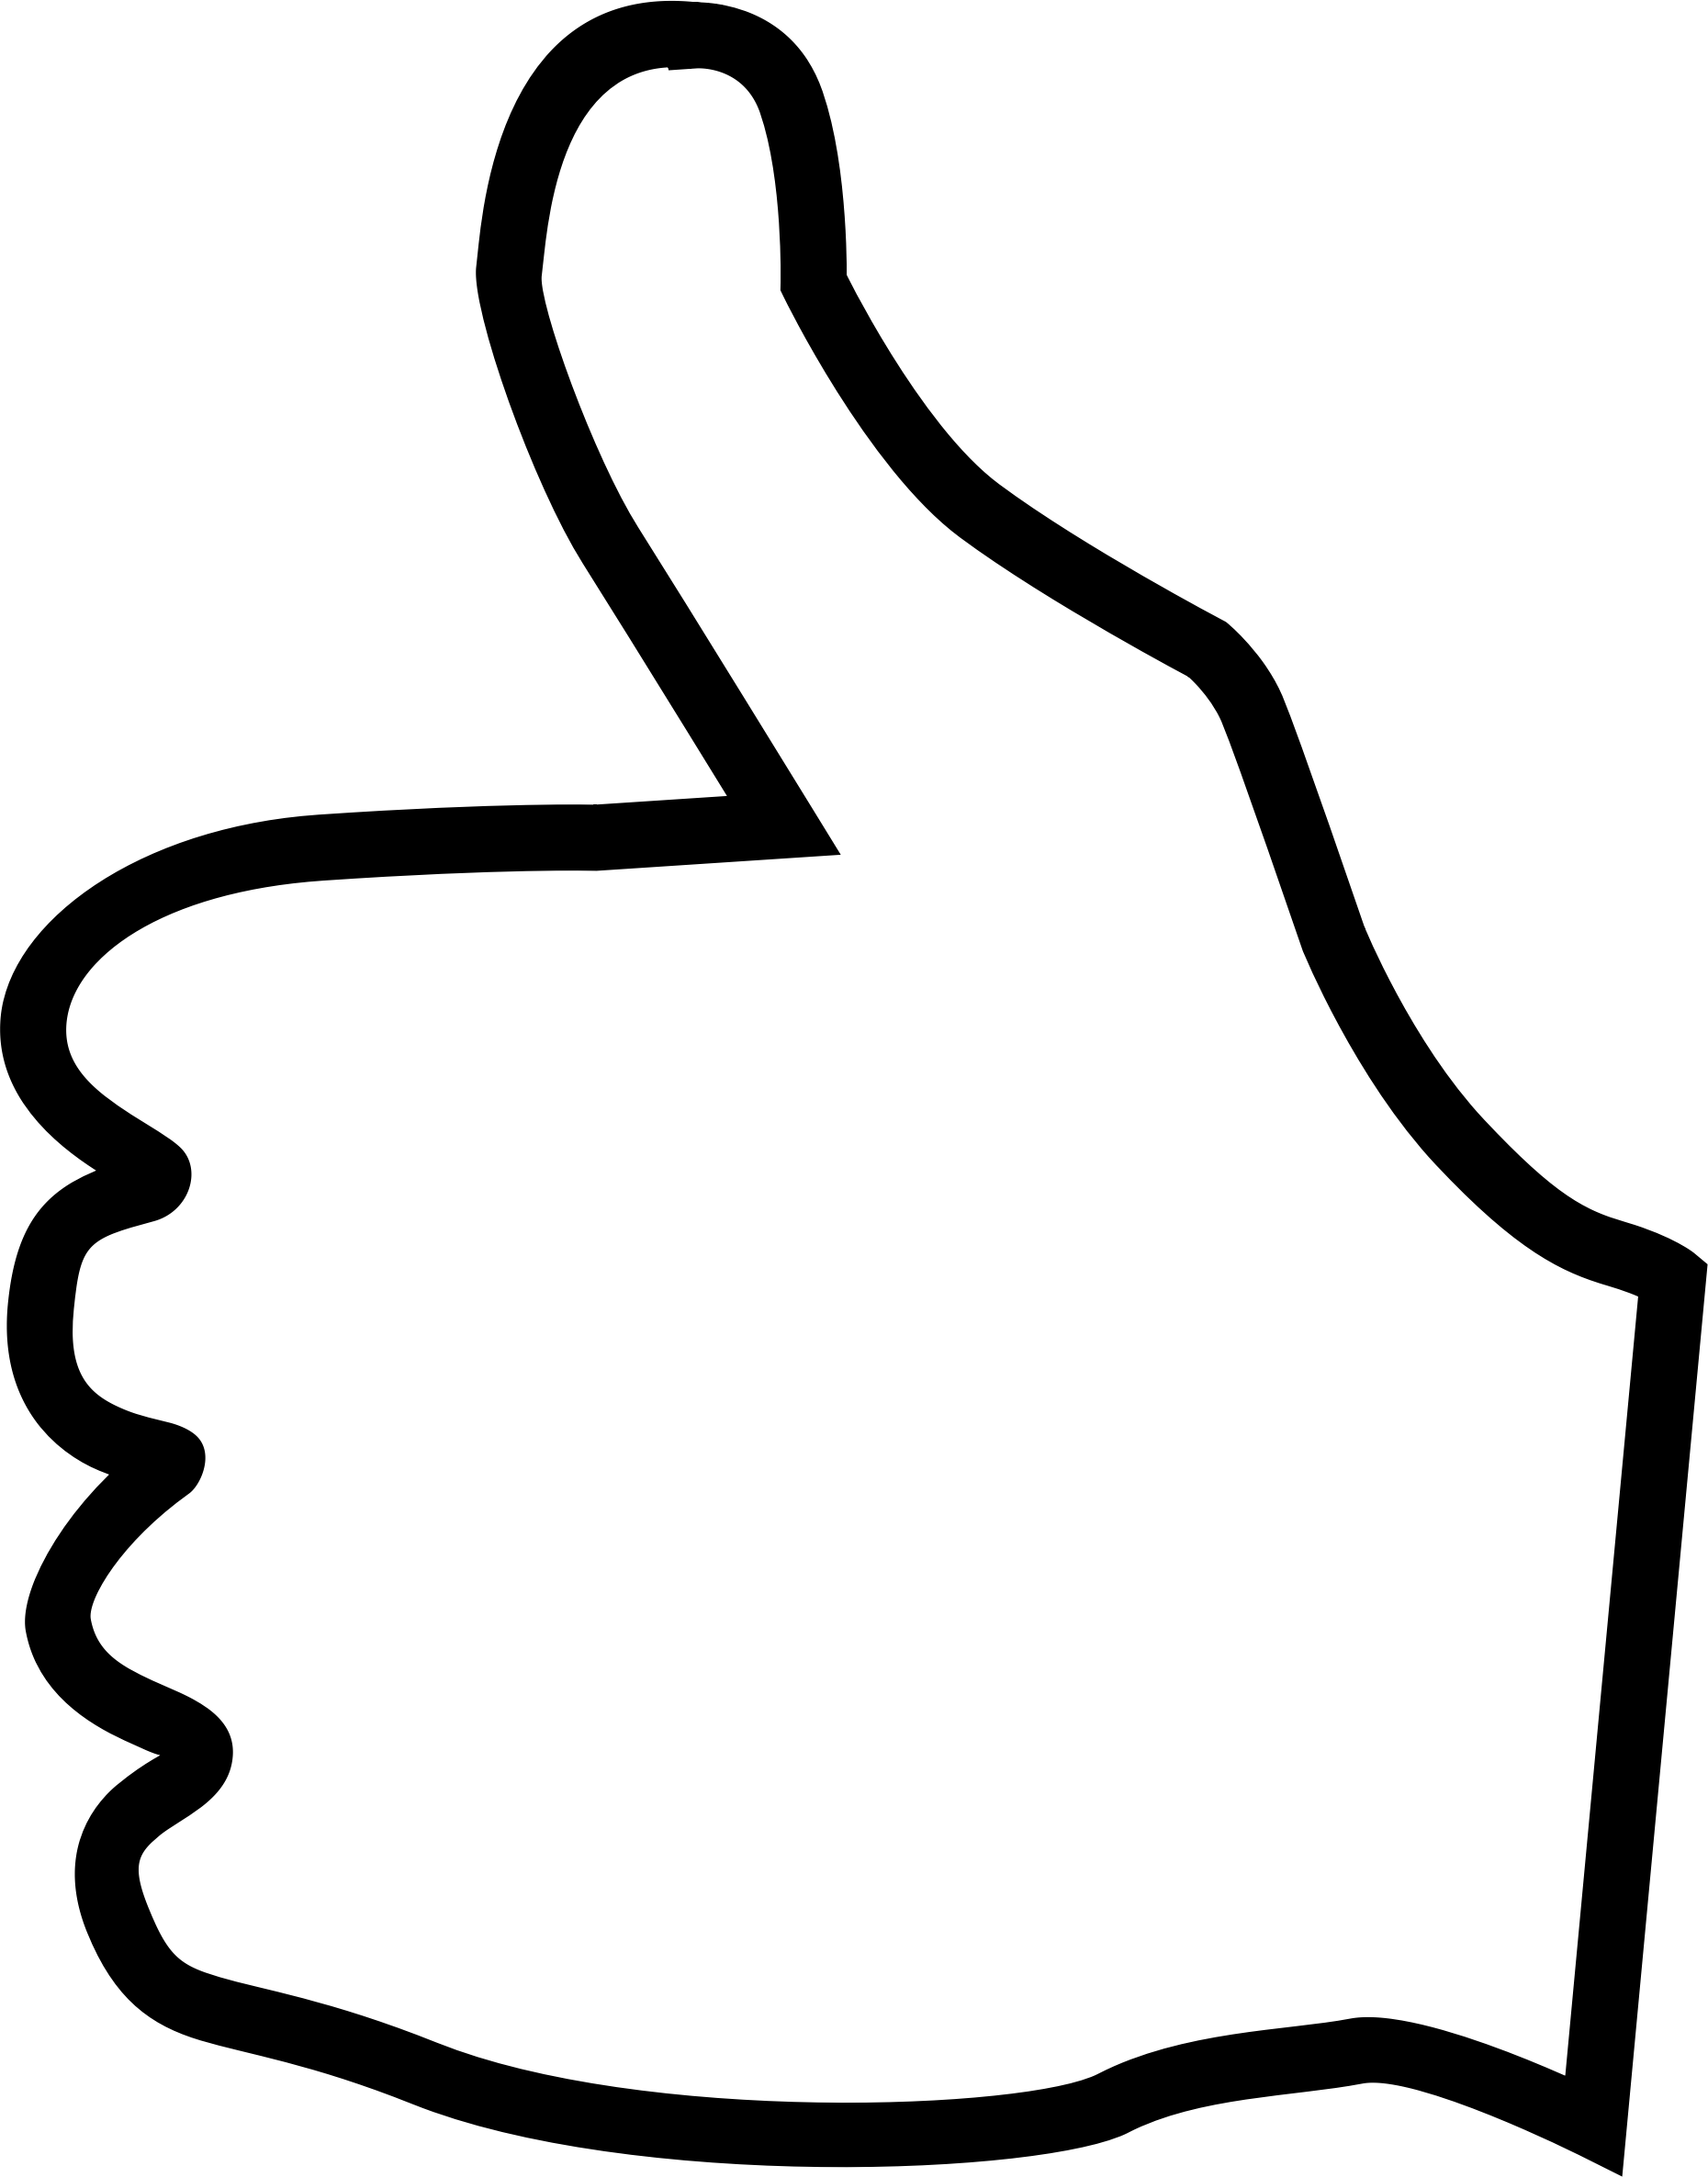 Thumbs up clipart images